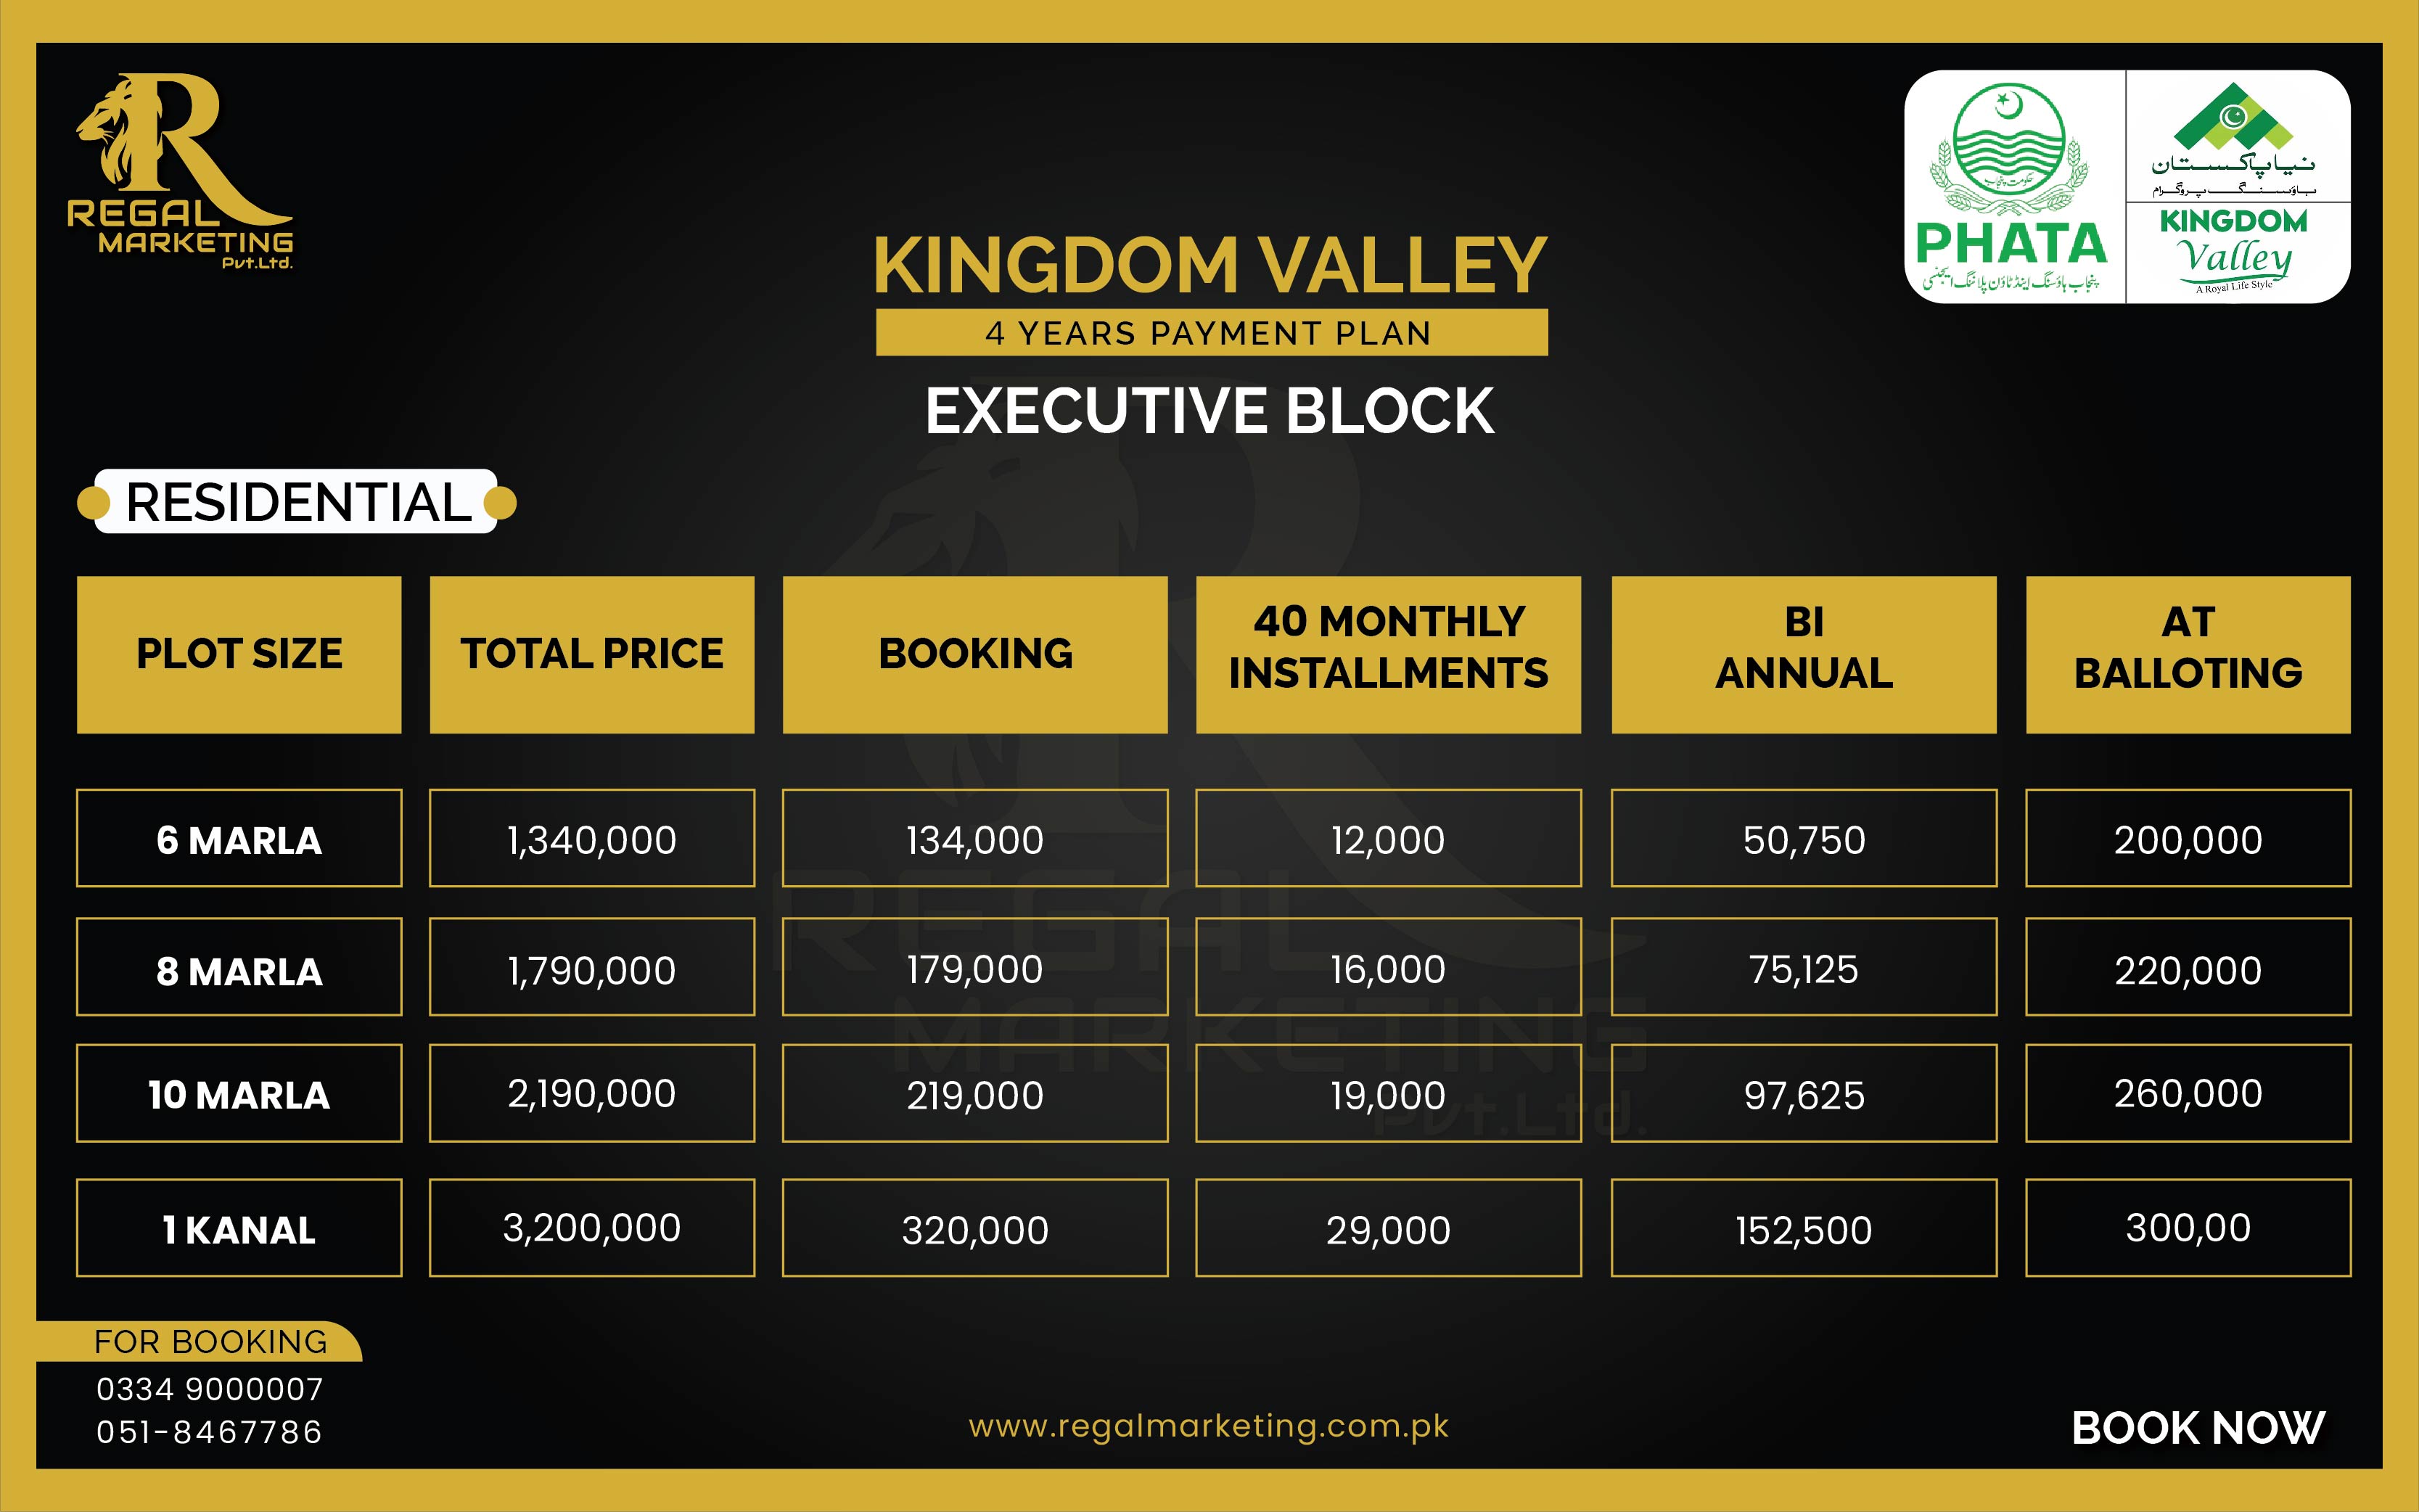 kingdom valley Islamabad executive block residential plots payment plan